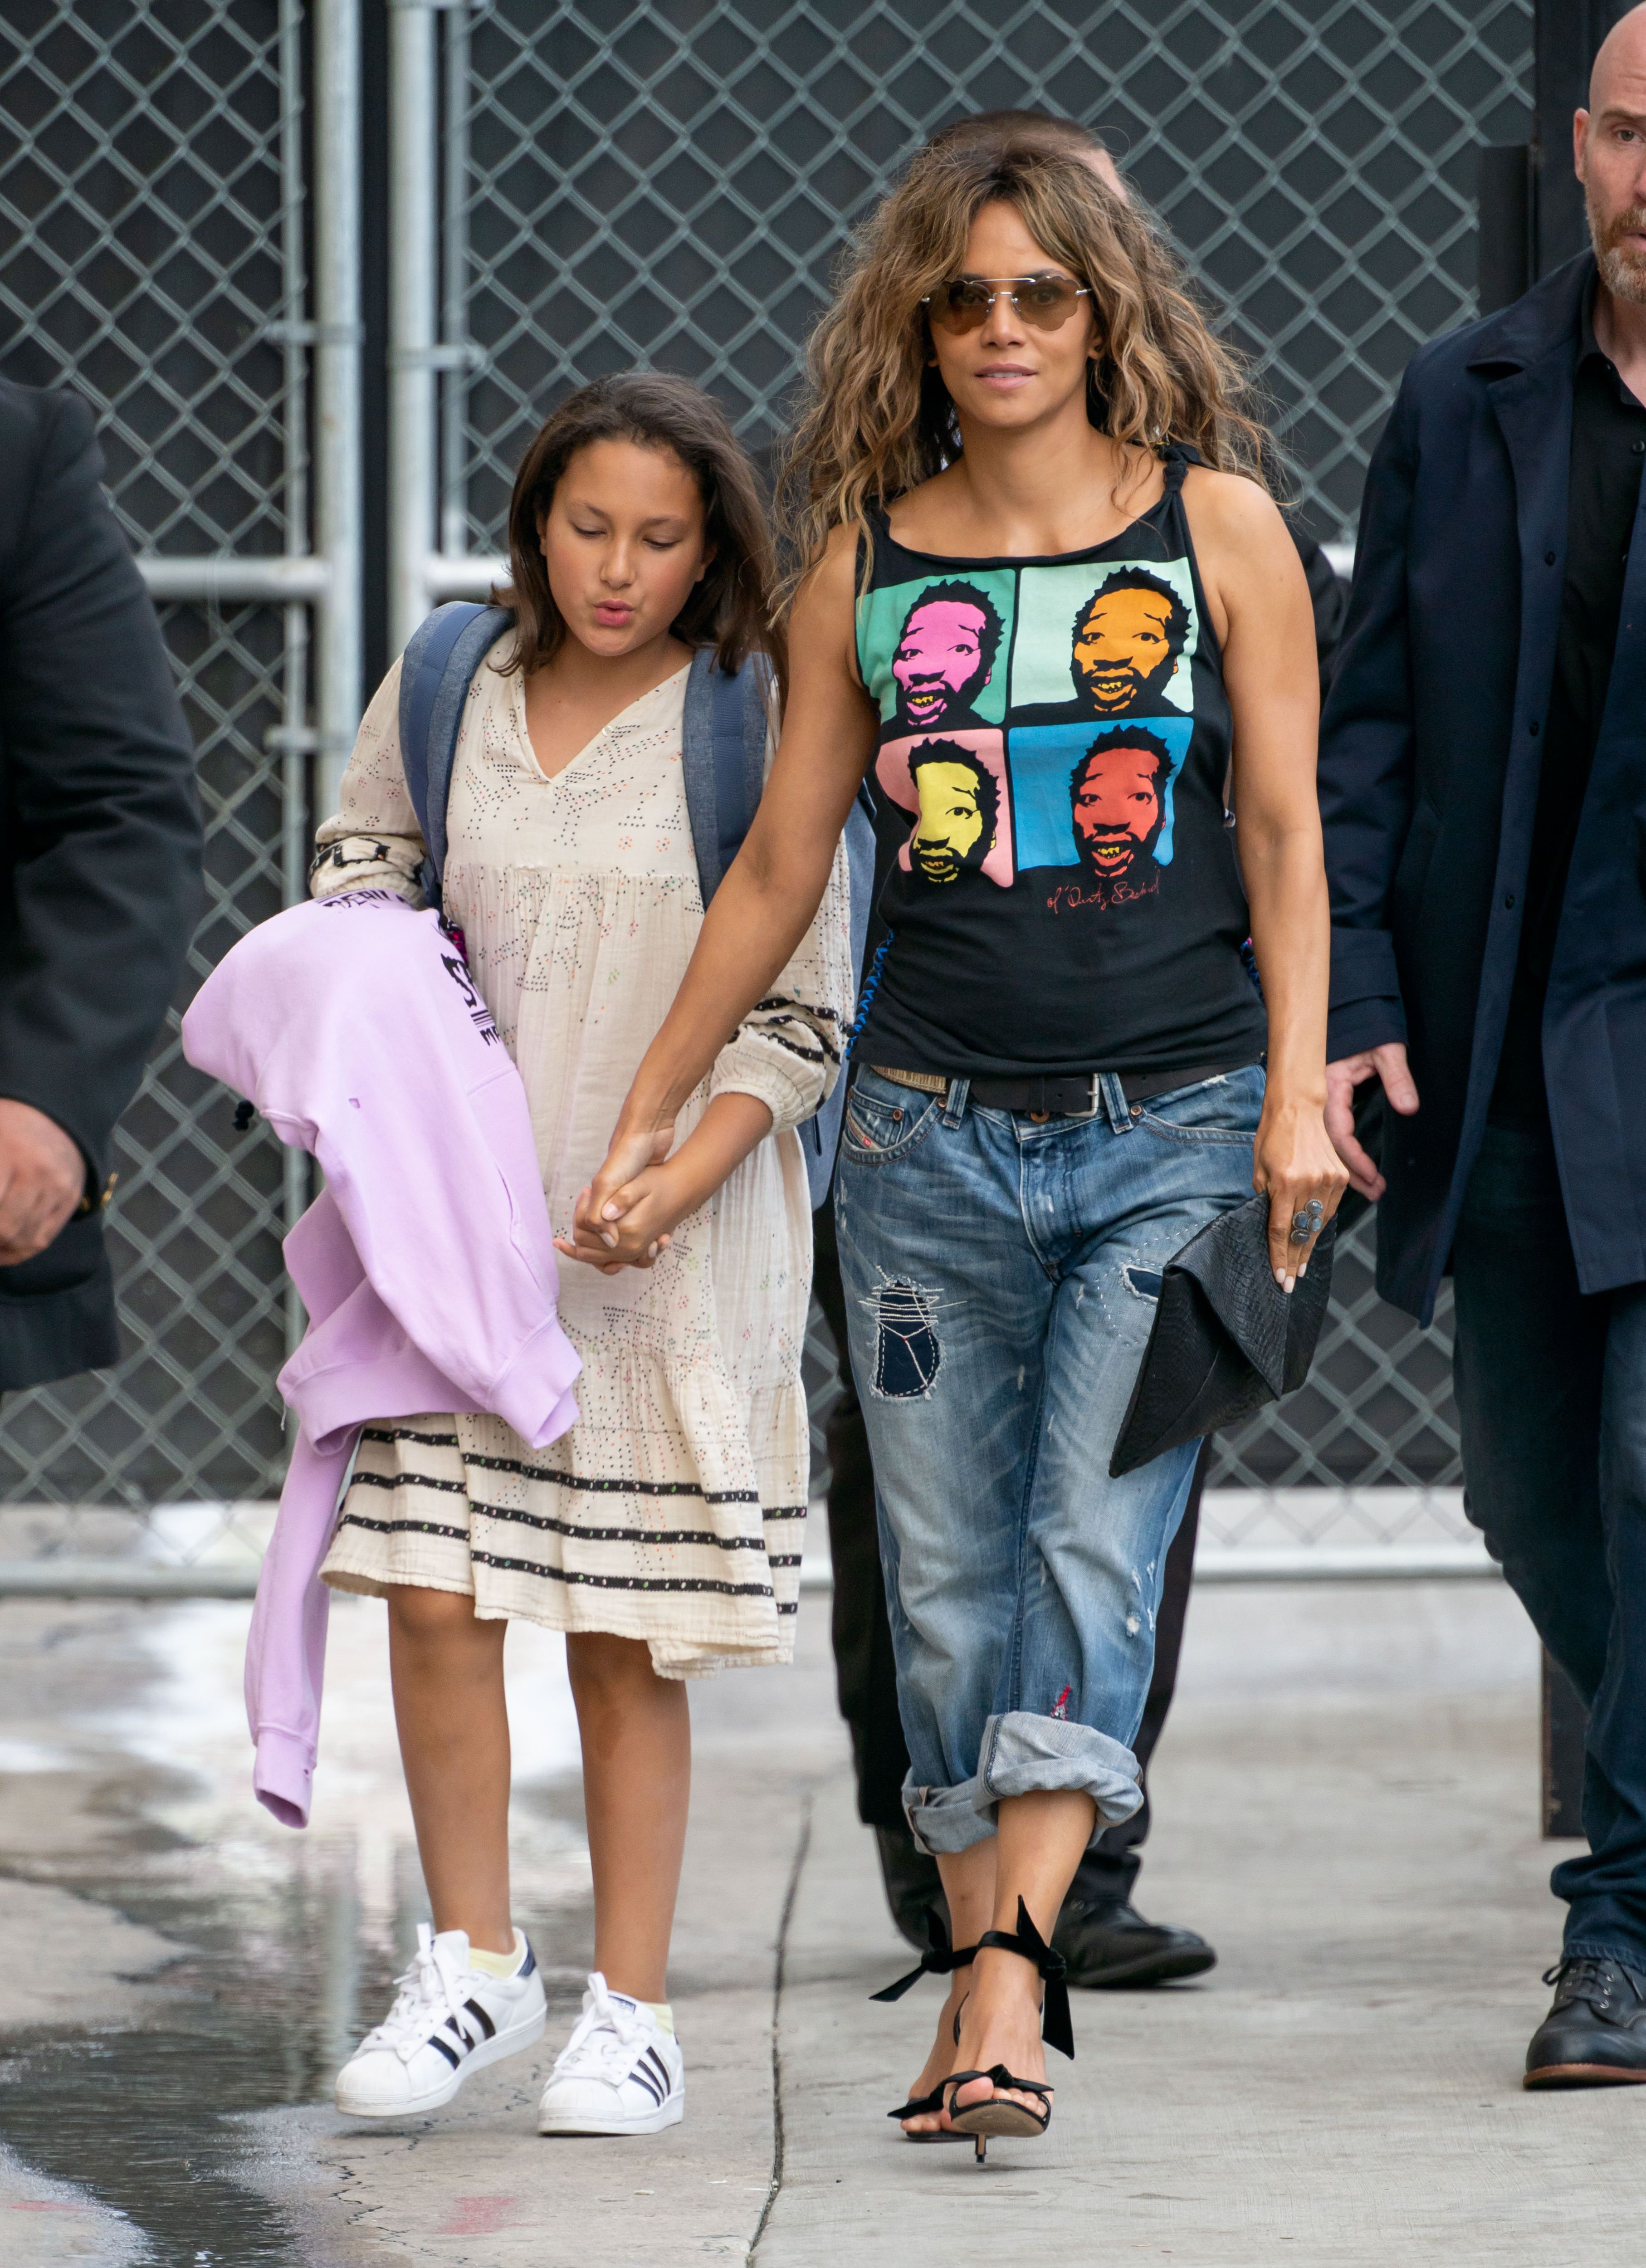 Halle Berry's 2 Kids: Get to Know Daughter Nahla and Son Maceo